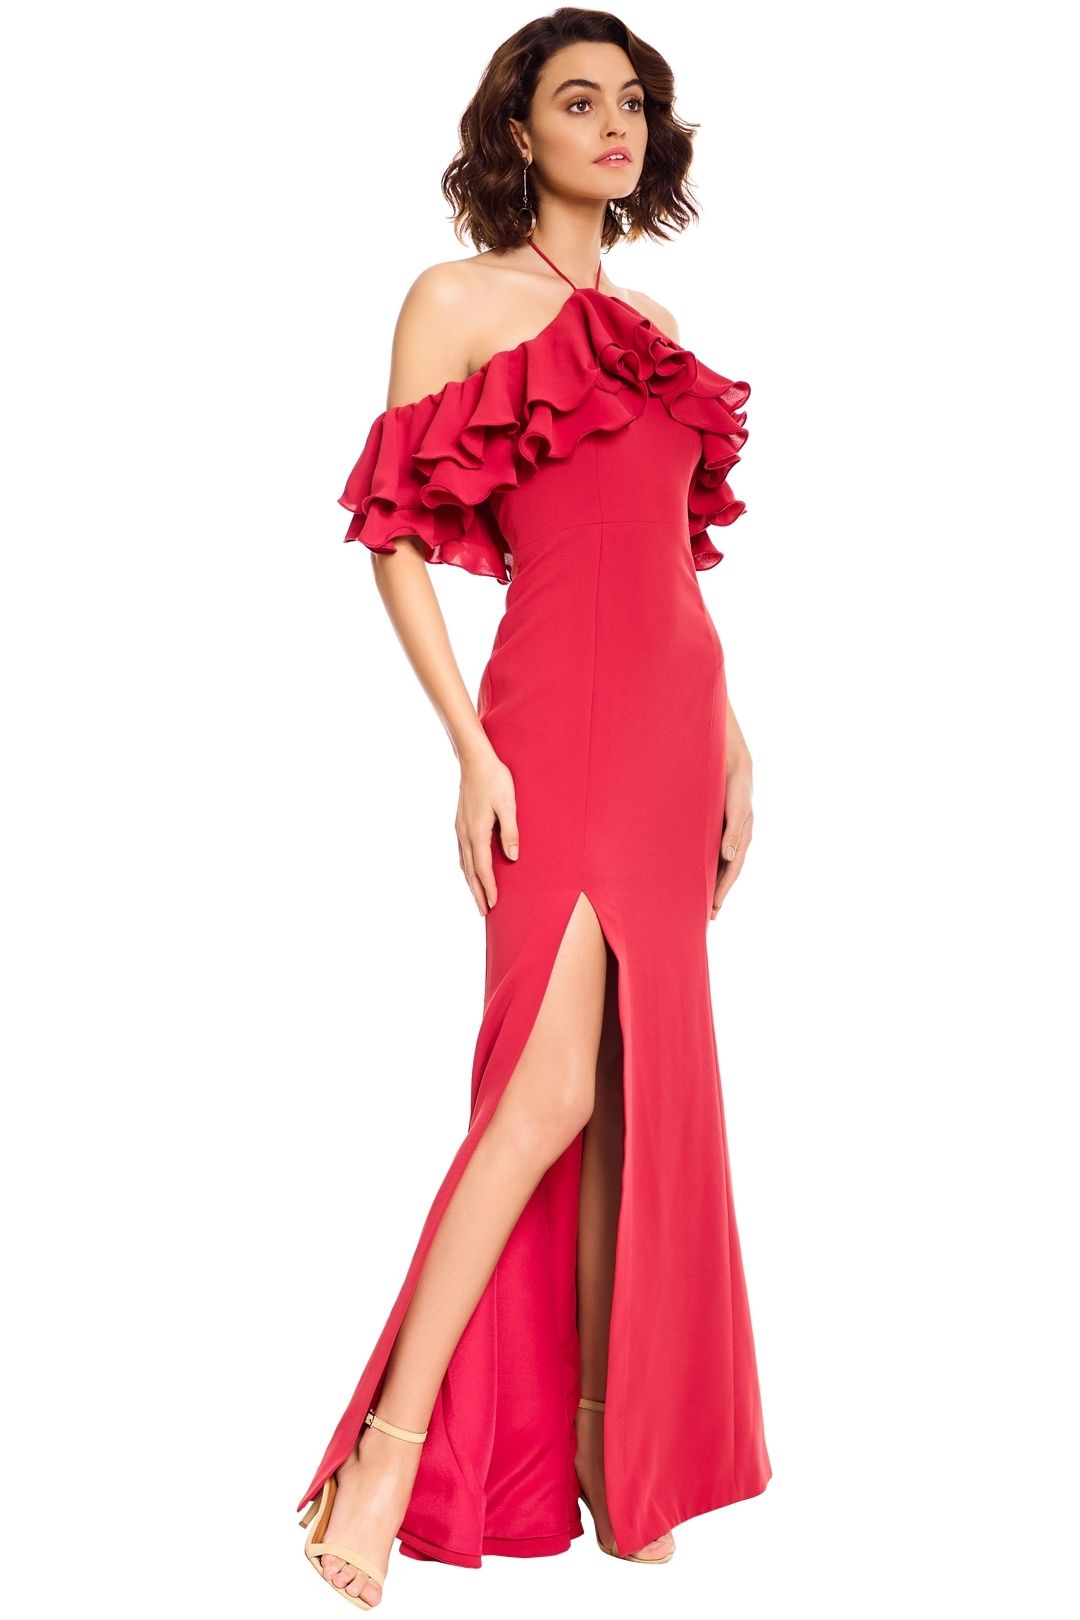 CMEO Collective - Immerse Gown - Rose - Side